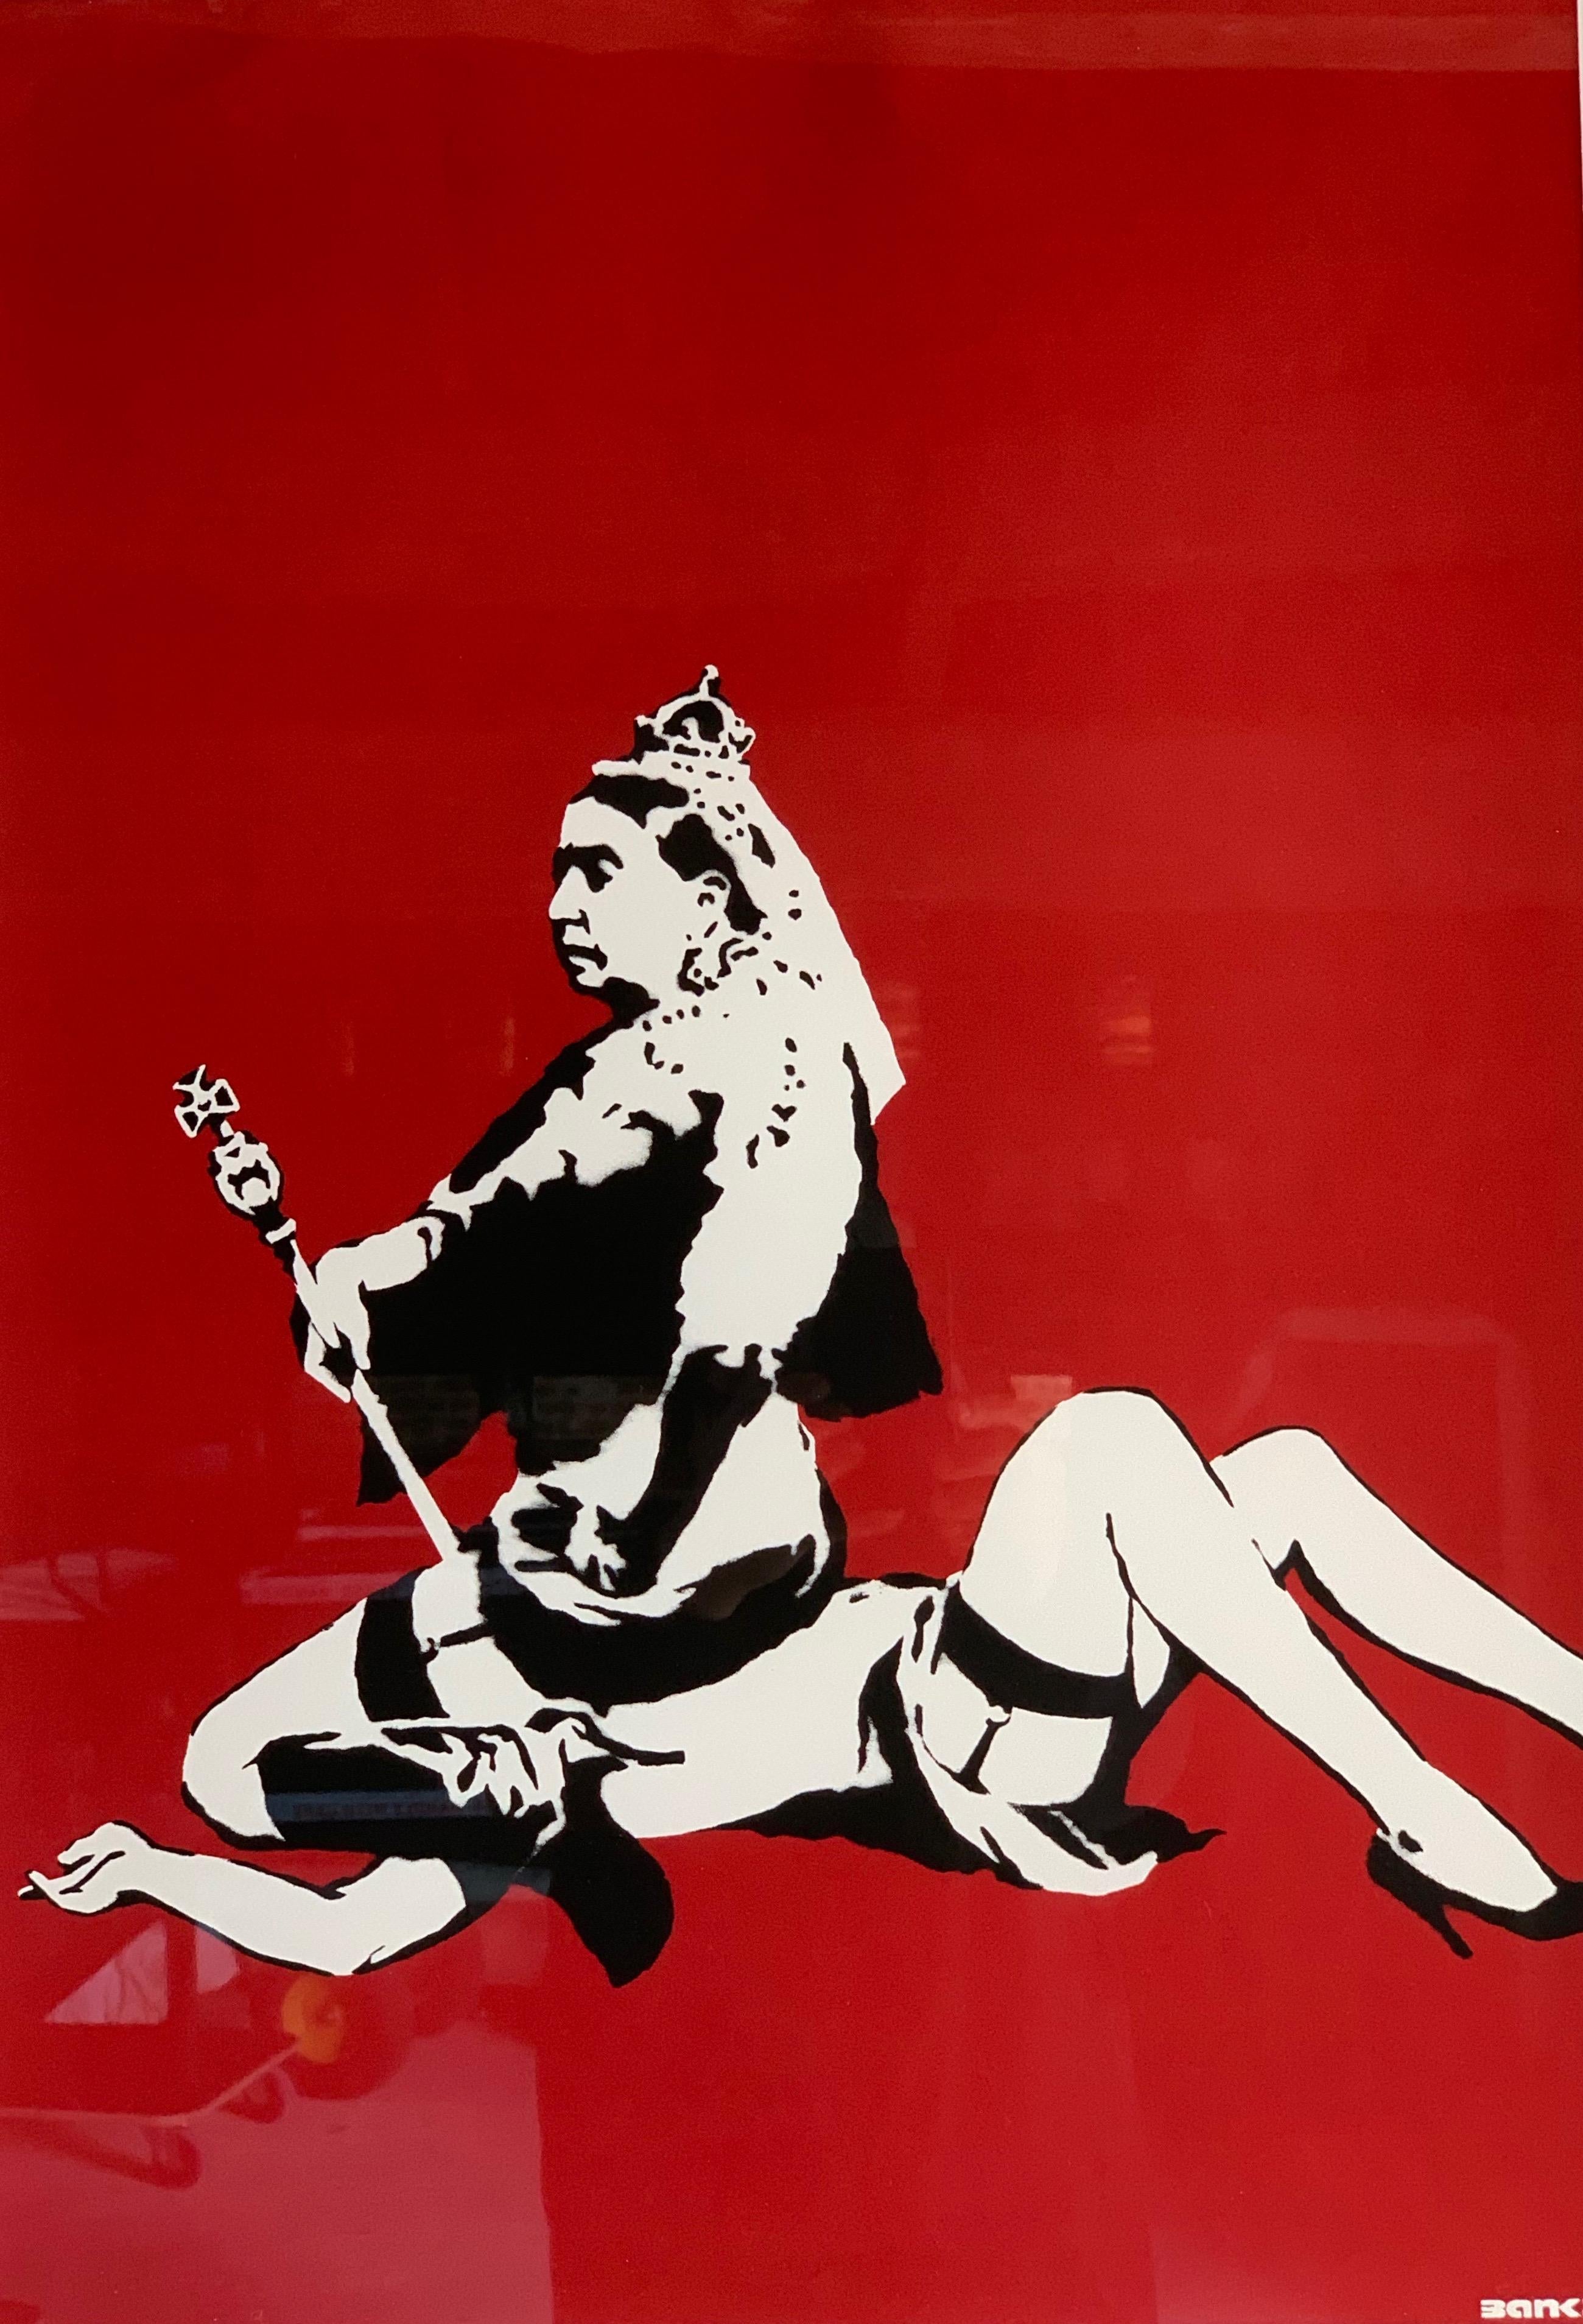 Banksy Queen Vic (British, b.1974)

Queen Vic is an early Banksy artwork printed by Pictures On Walls in 2003. ... This irreverent stencil image depicts Queen Victoria, England's monarch from 1837 until her death in 1901, as a lesbian engaged in